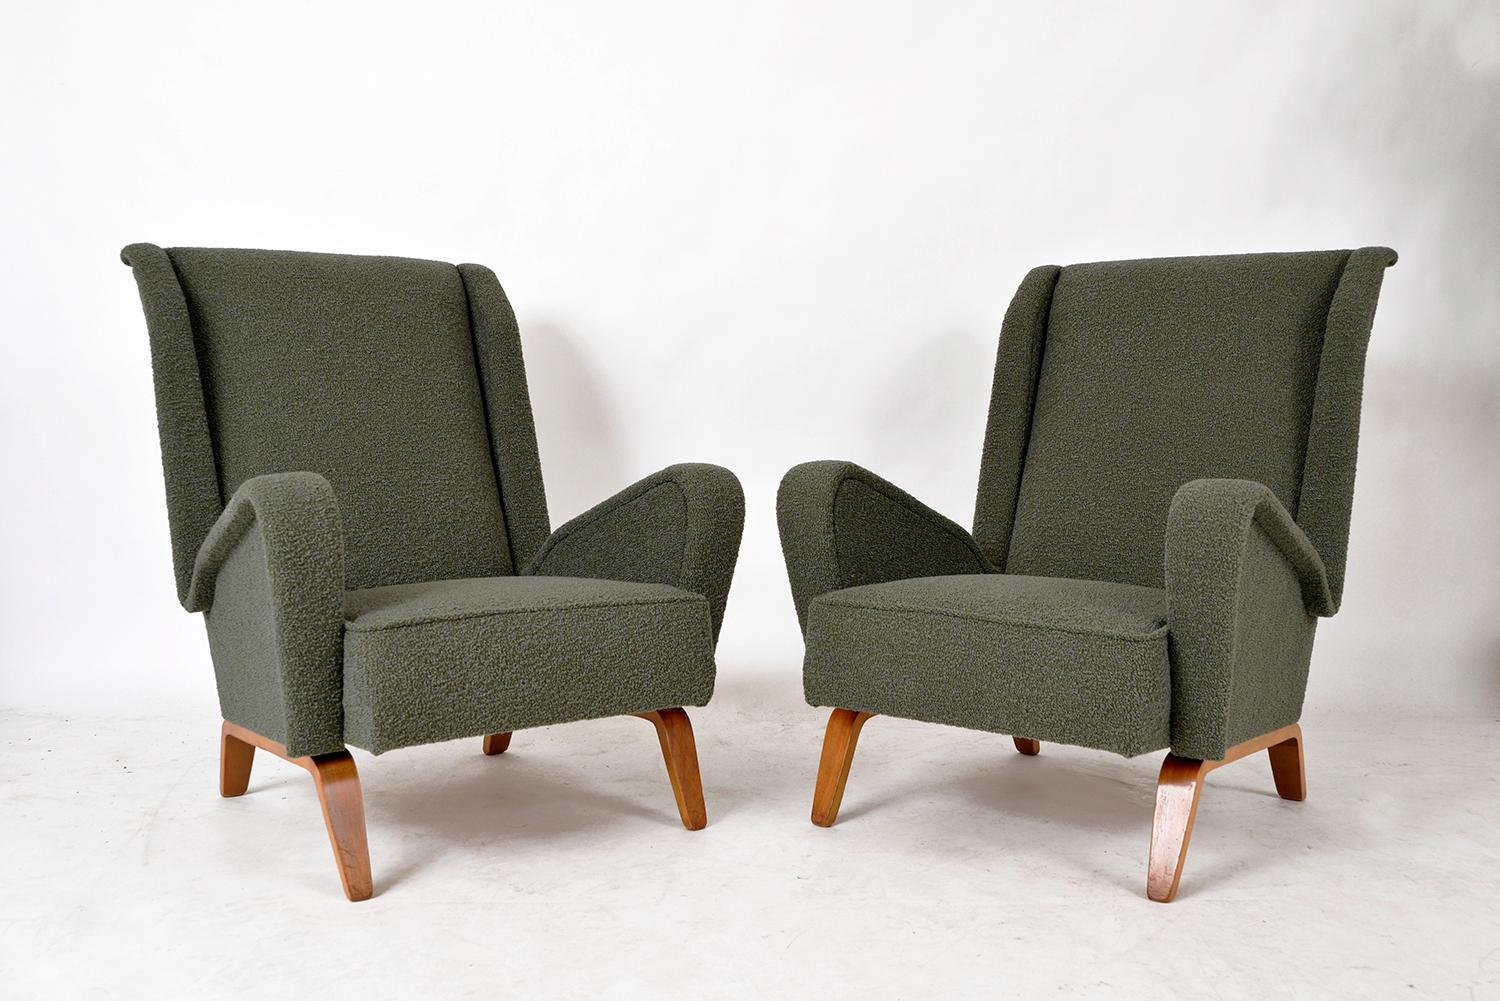 An incredibly stylish pair of 1950s armchairs on teak bentwood legs with curves in all the right places! Bought in Italy, they are very much in the style of Gio Ponti, characterized by the beautiful backrest and the geometric shape of the angled